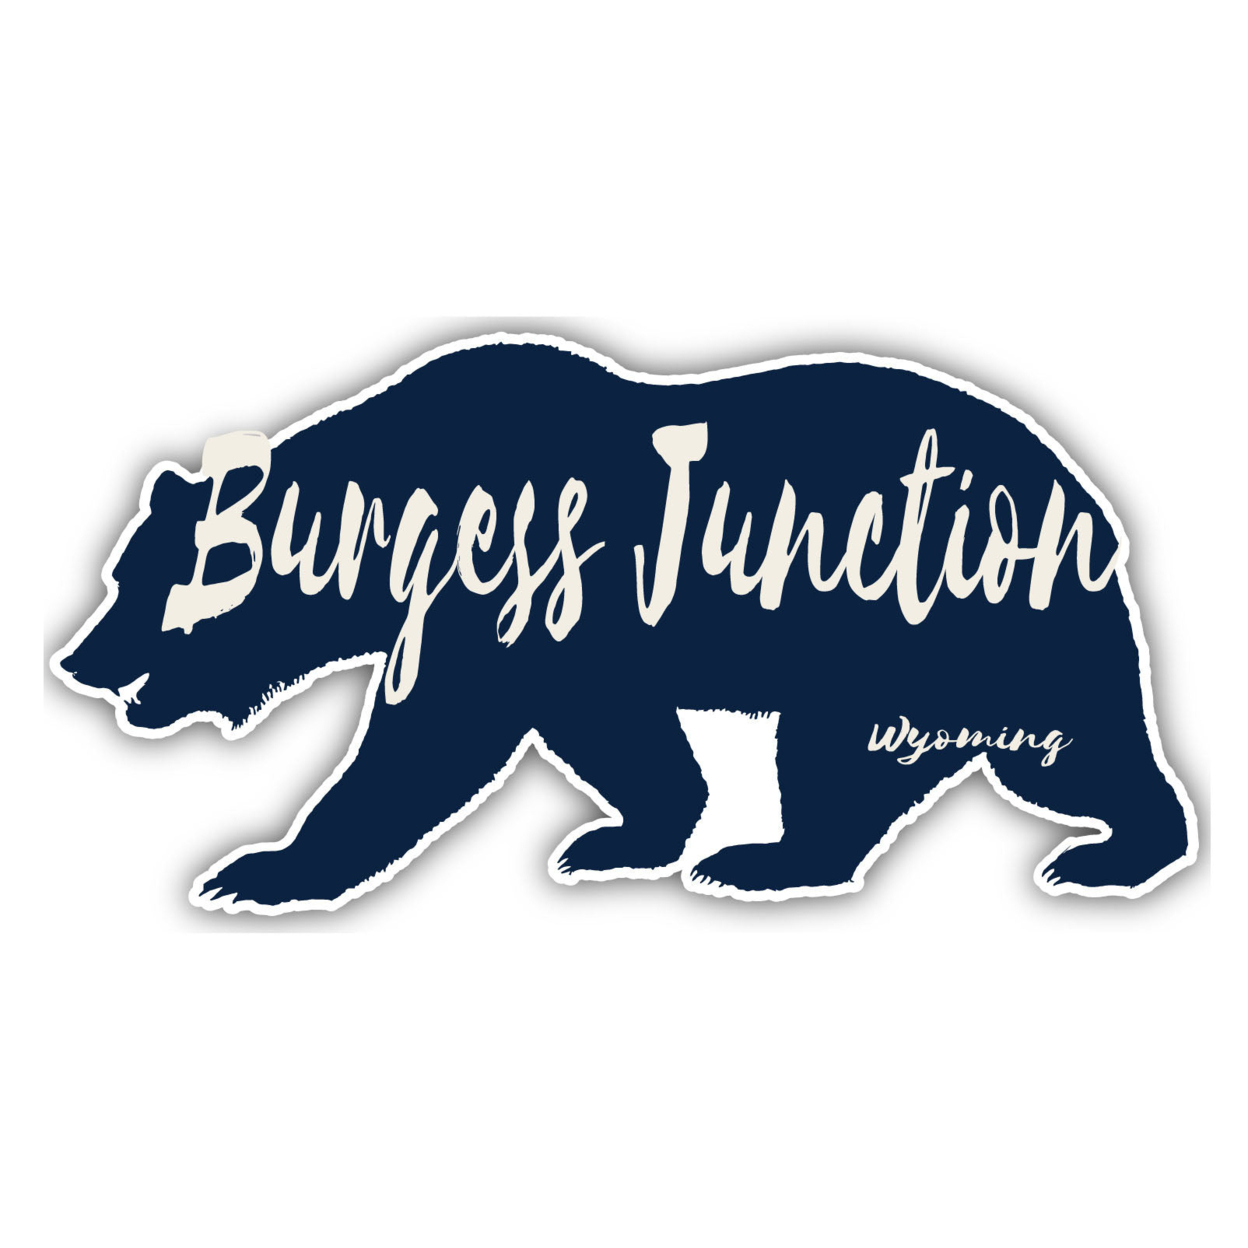 Burgess Junction Wyoming Souvenir Decorative Stickers (Choose Theme And Size) - 4-Pack, 6-Inch, Bear